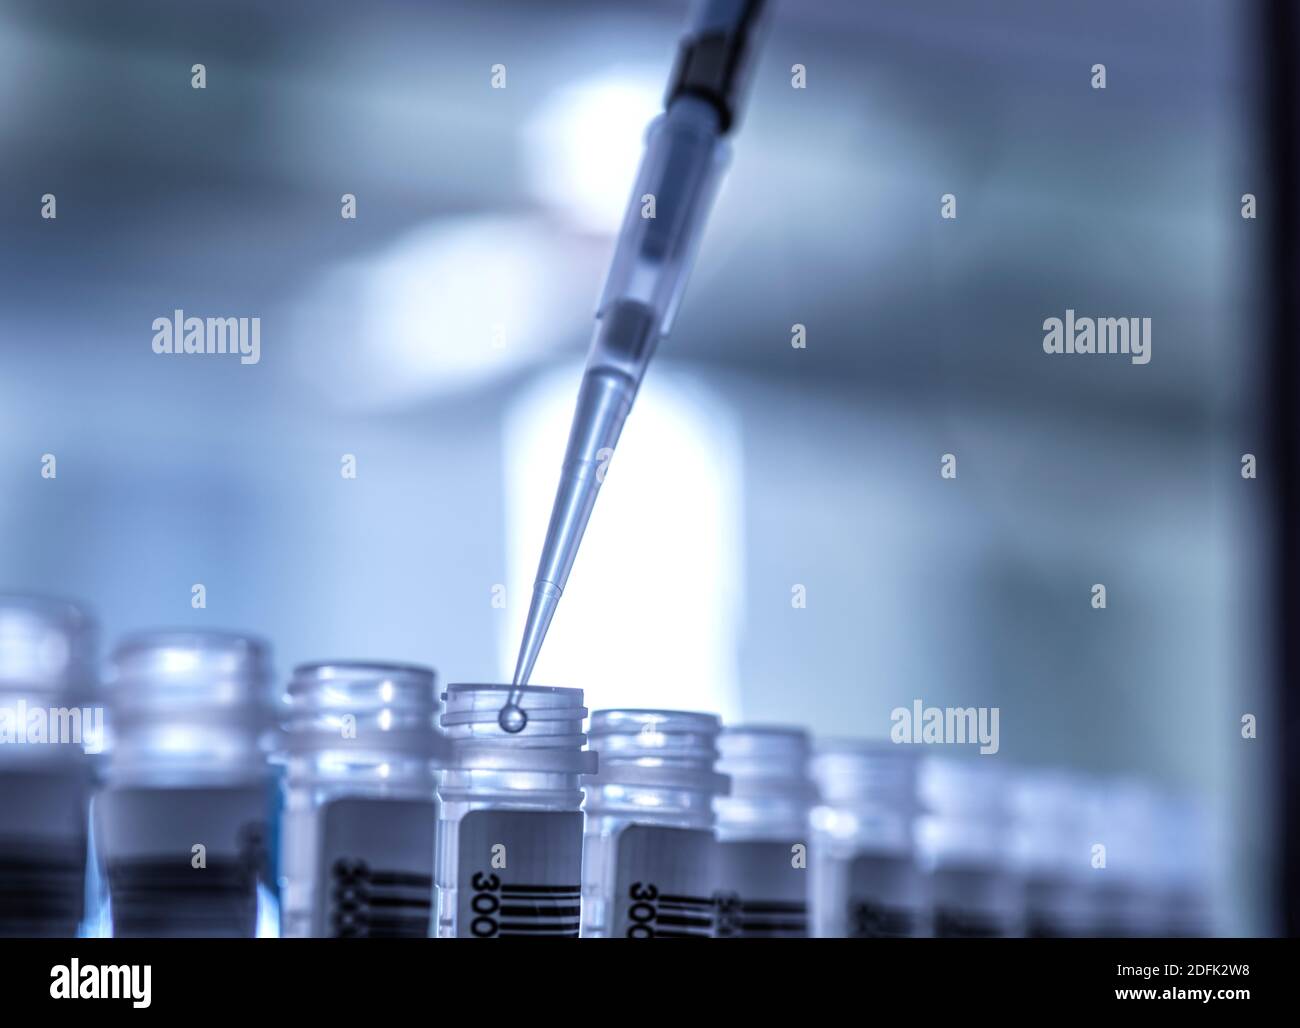 Genetic research, conceptual image Stock Photo